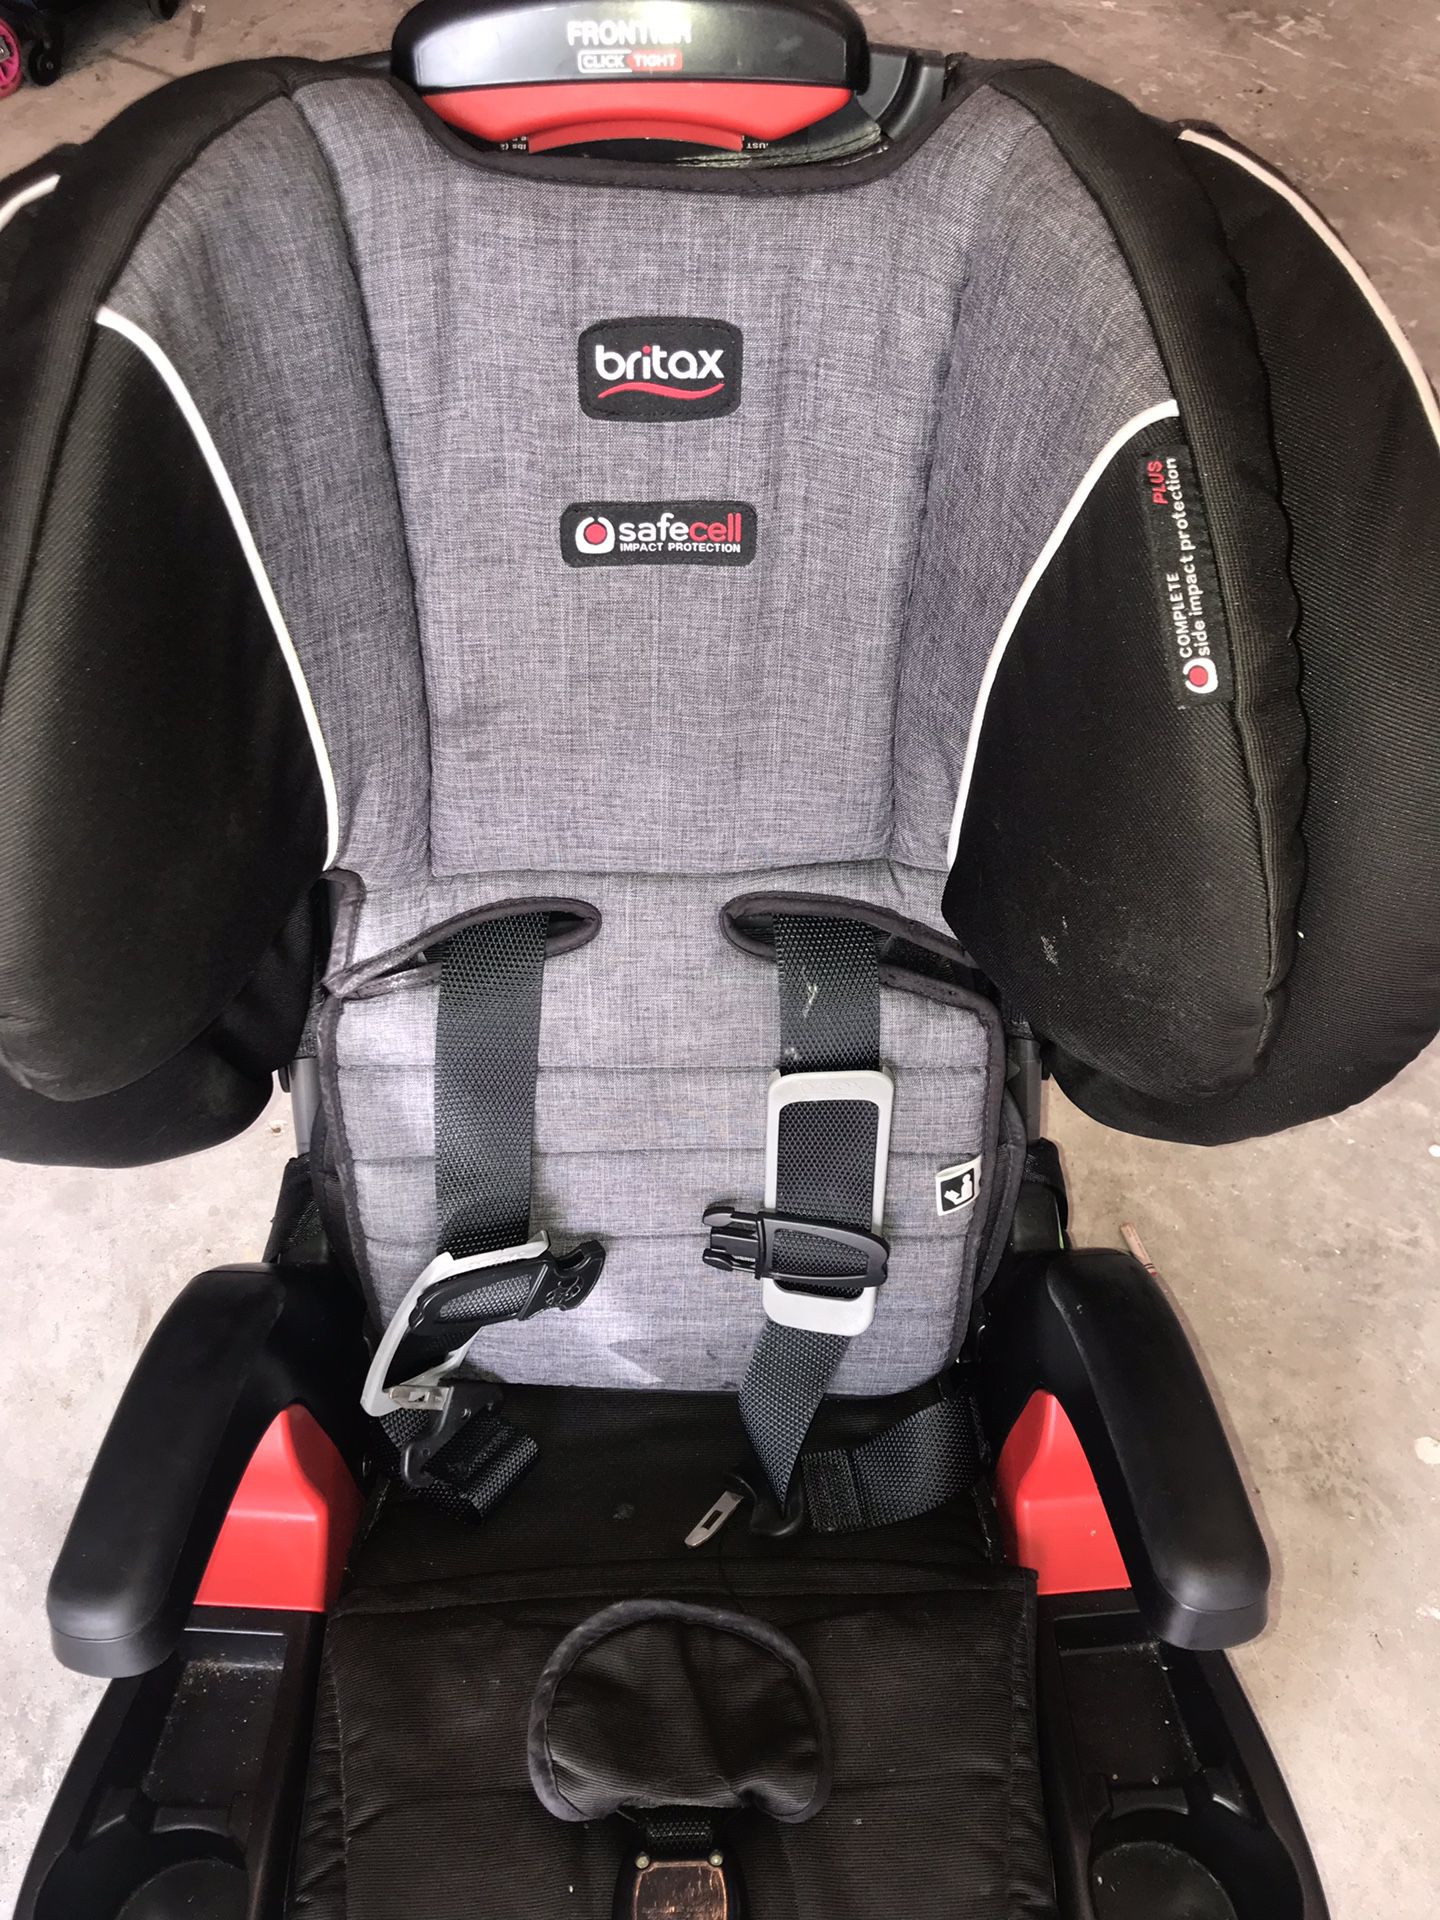 Britax Frontier Clicktight Harness Booster Car seat